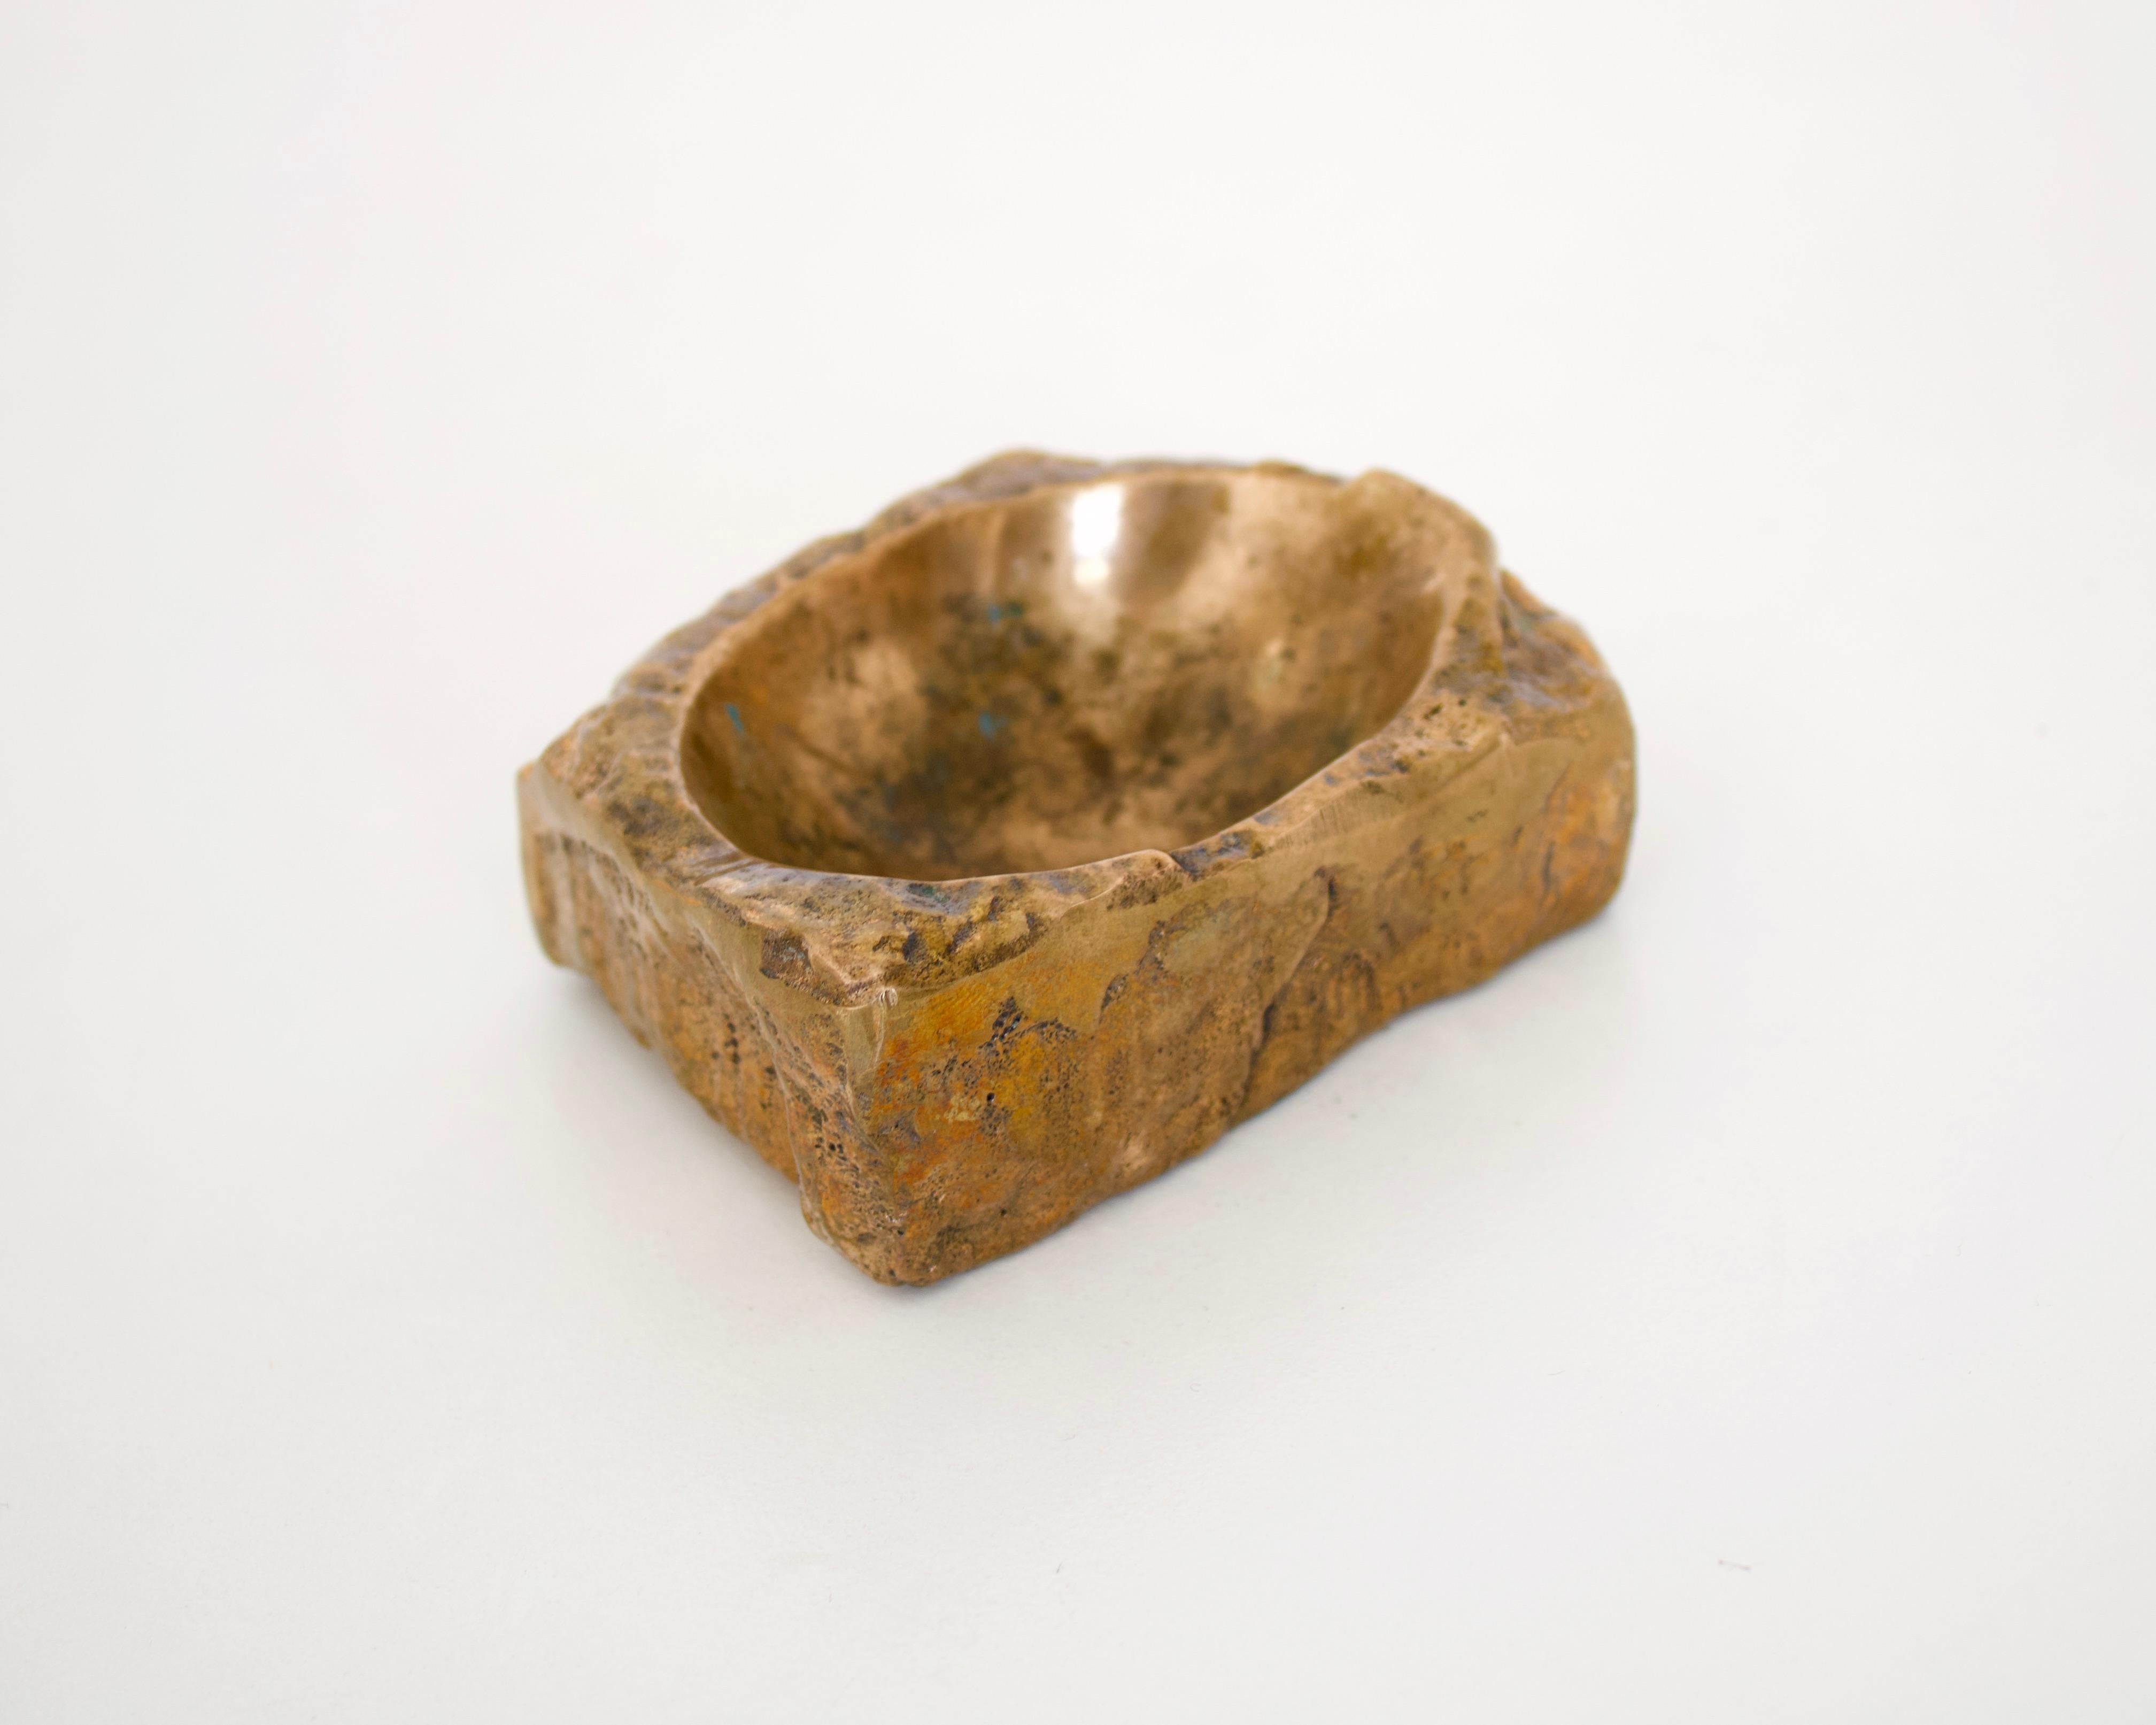 French artist Monique Gerber vintage sculptural bronze abstract rock form vide poche or ashtray. Art du bronze.
Patina is beautiful and shows its age.
These bronze objects were often used as ashtrays and this one has slight evidence of that usage.